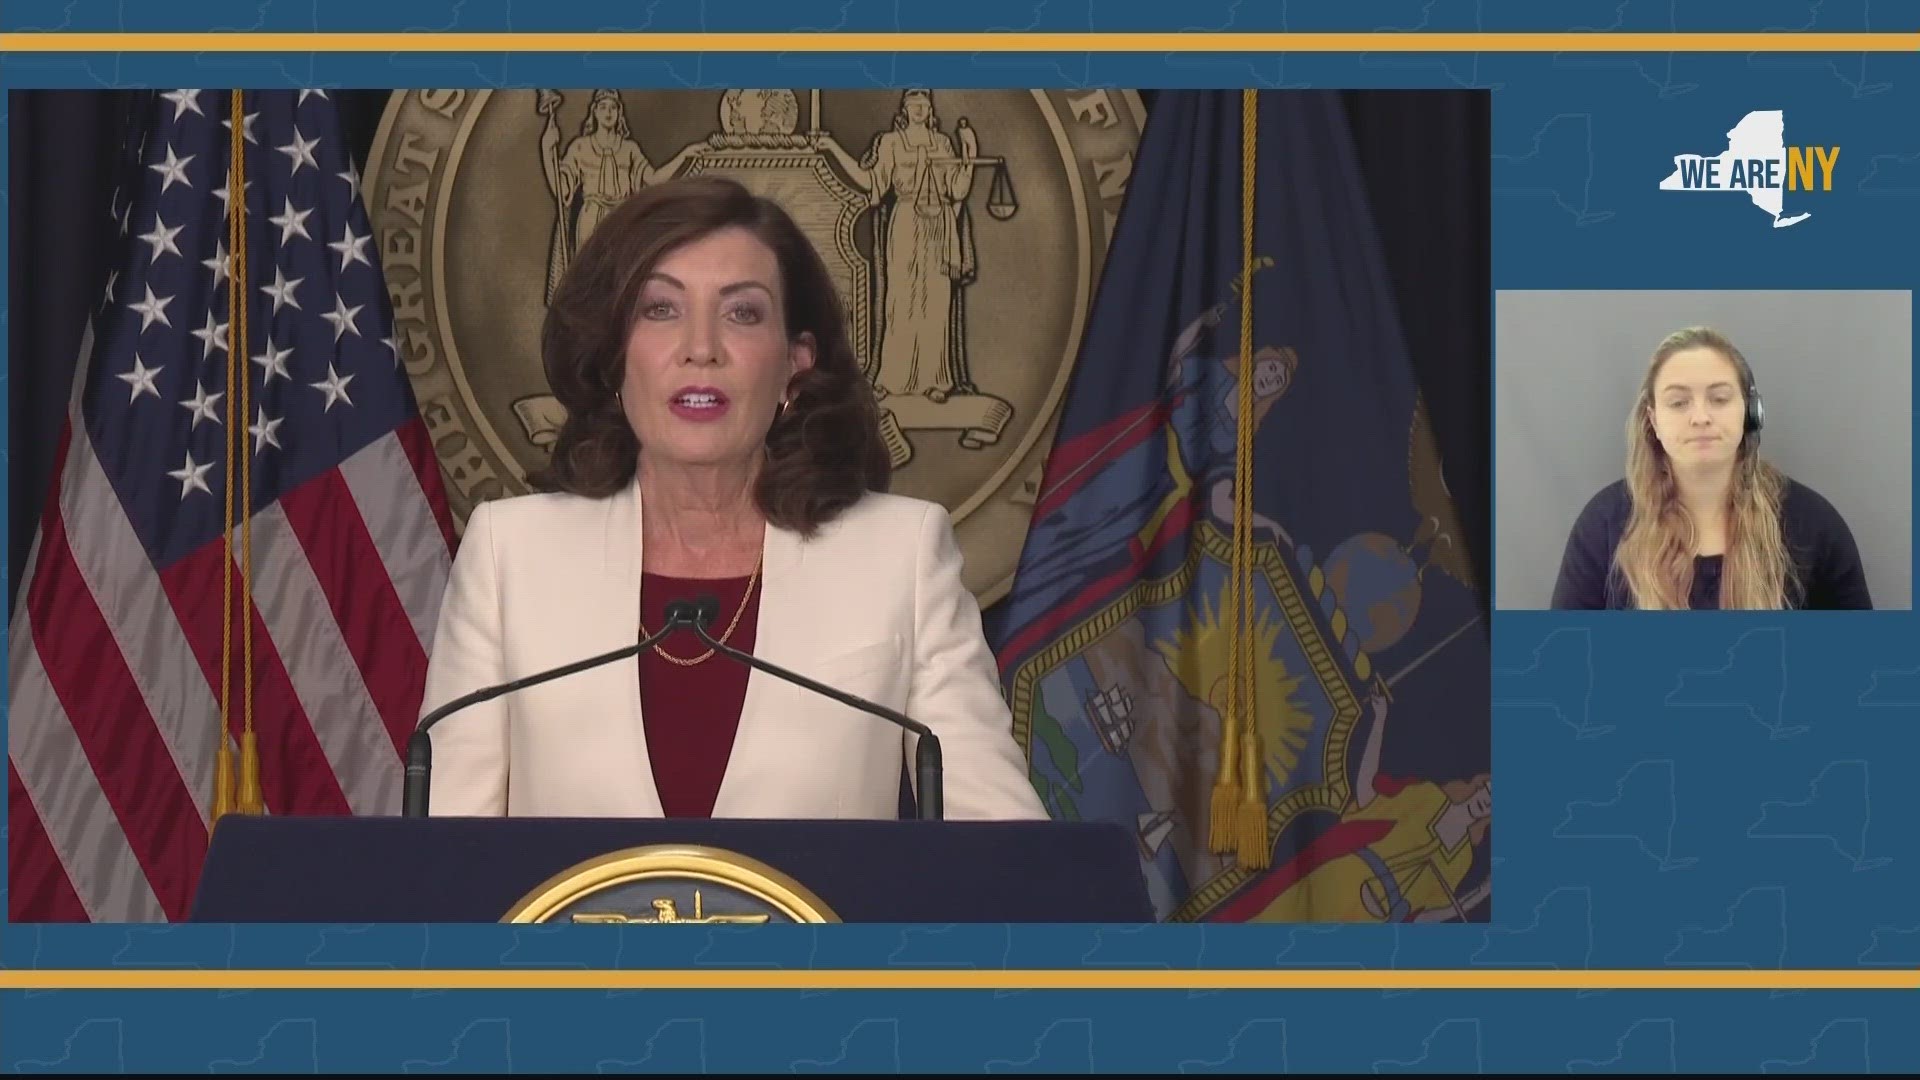 Gov. Hochul makes significant points about anti-muslim and online hate for antisemetic rhetoric on social media.